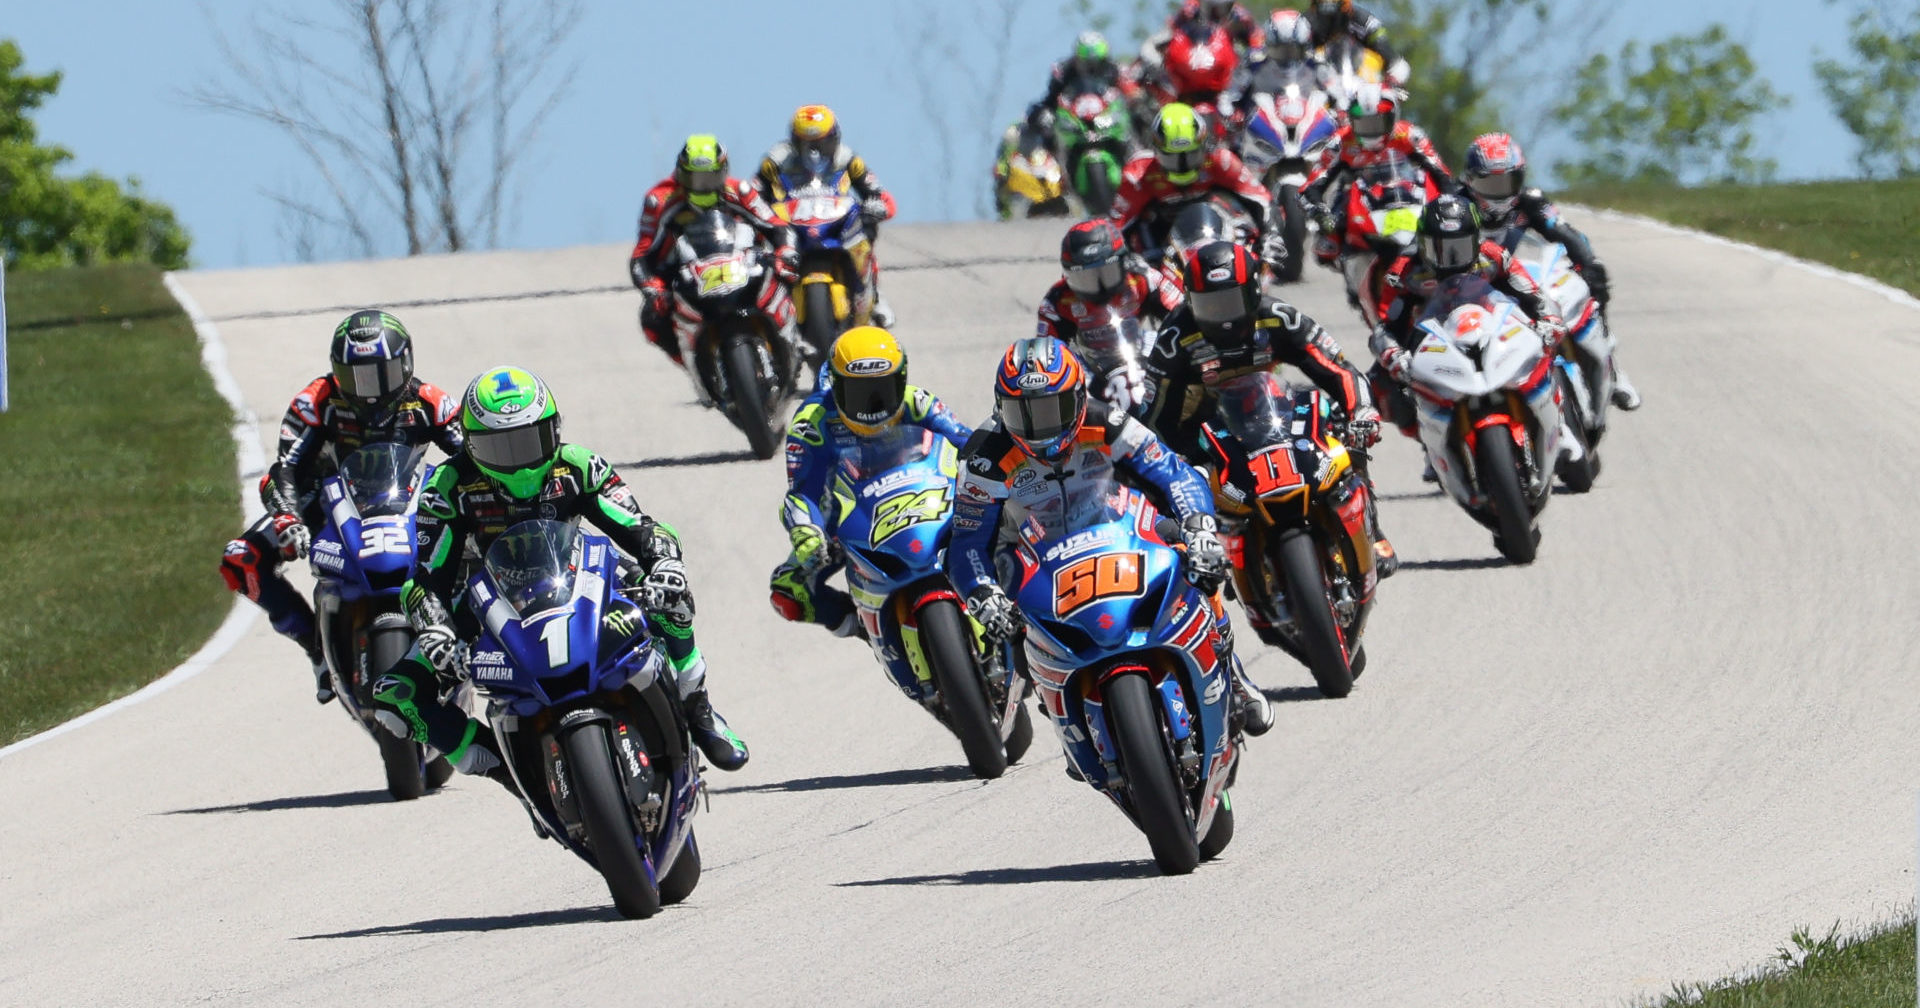 MotoAmerica racers leaning into the twisties